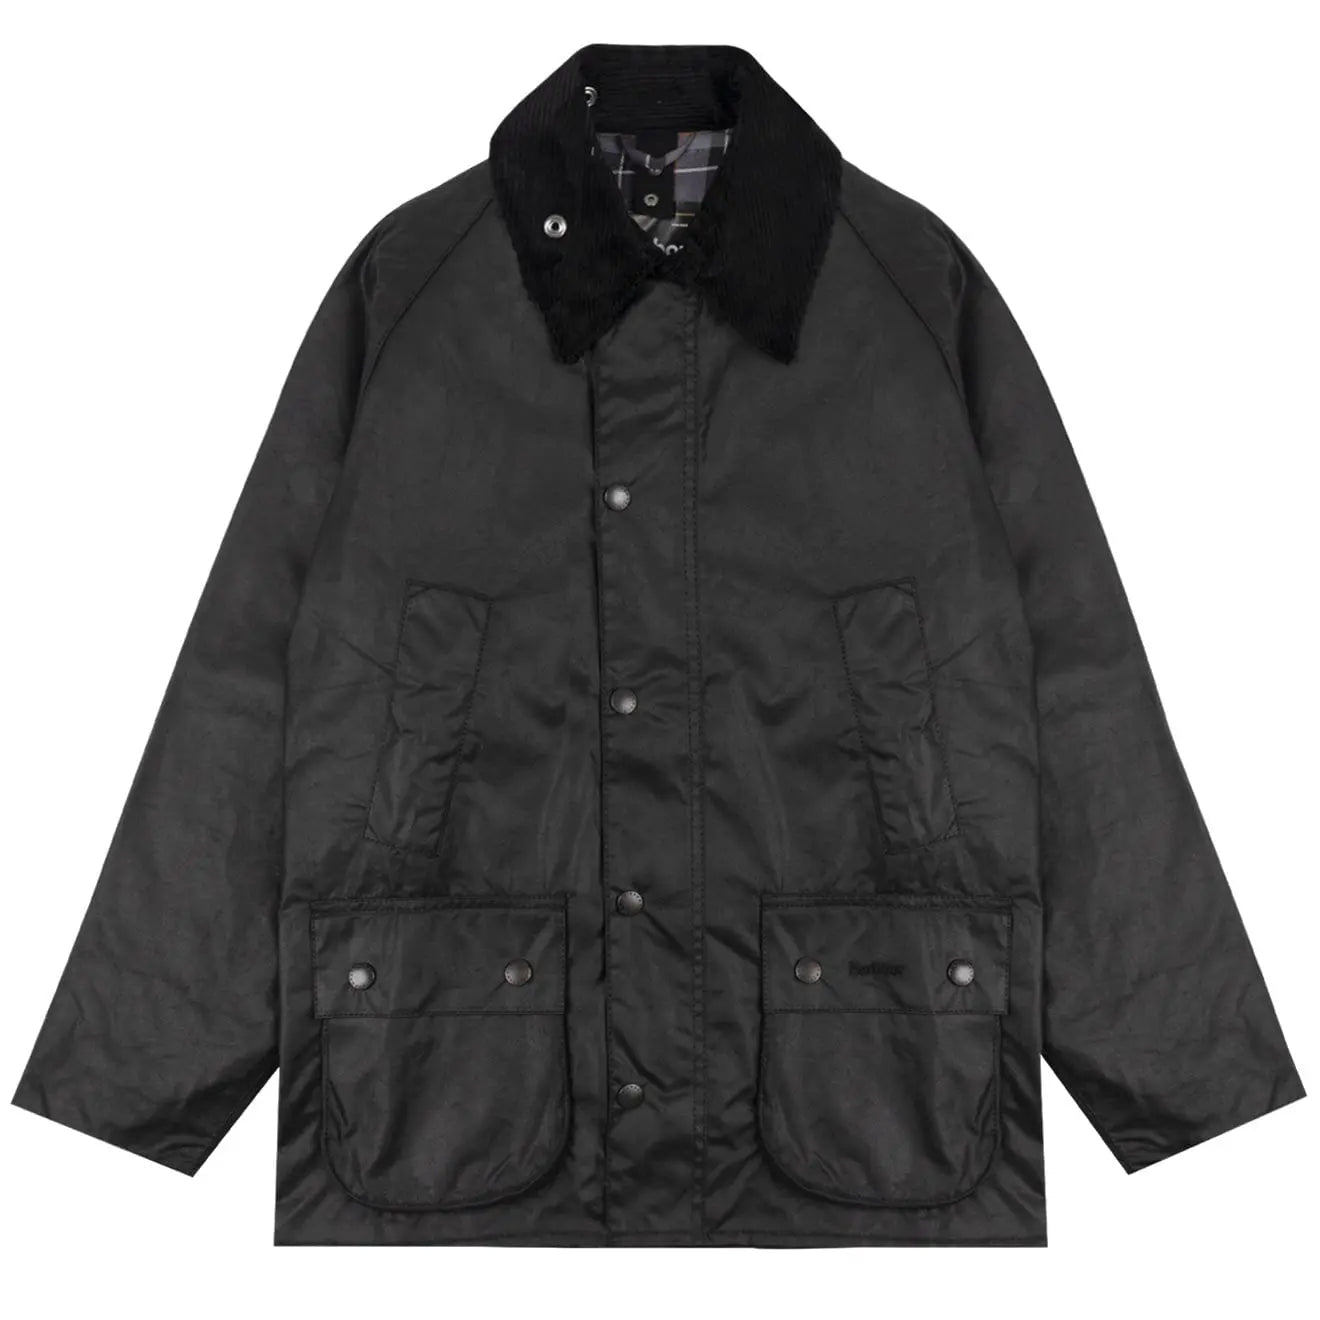 Barbour Bedale Wax Jacket Black | The Sporting Lodge